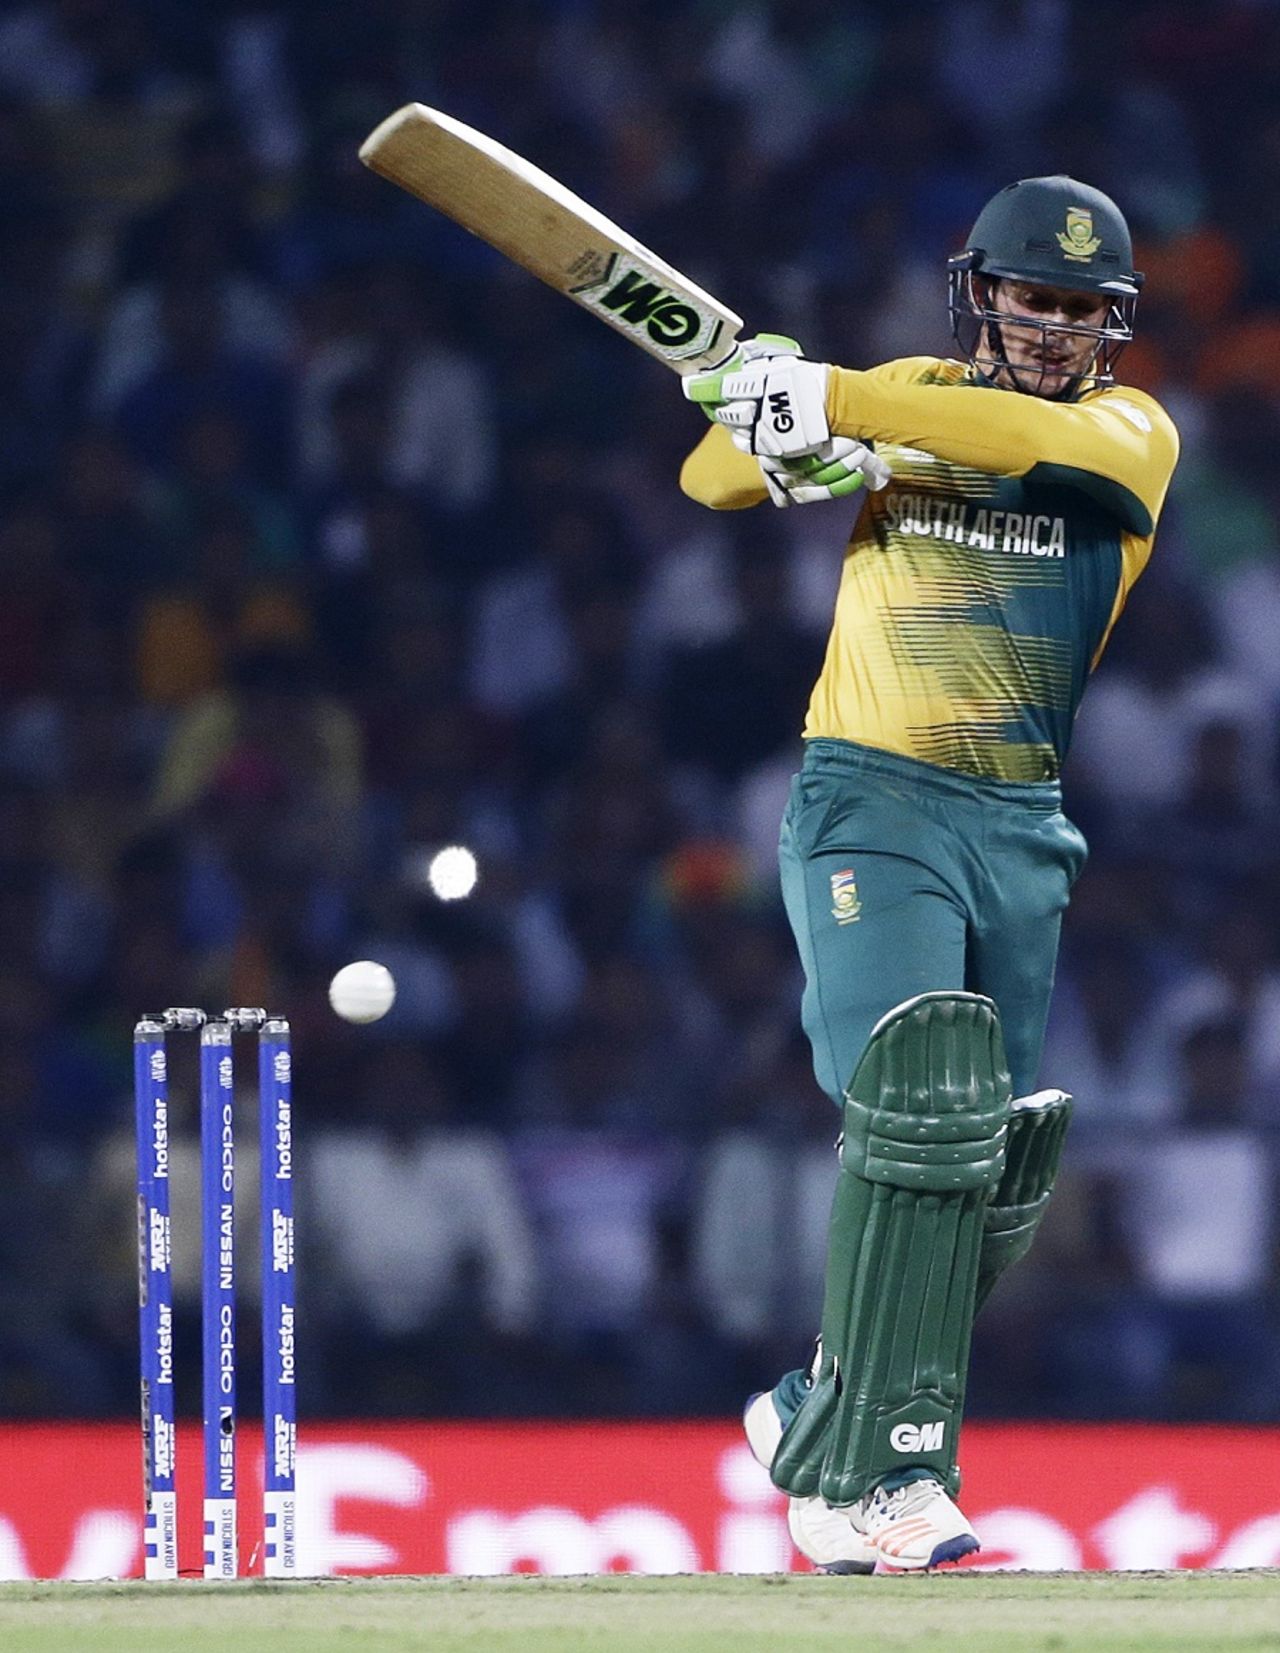 Quinton de Kock plays a pull shot, South Africa v West Indies, World T20 2016, Group 1, Nagpur, March 25, 2016